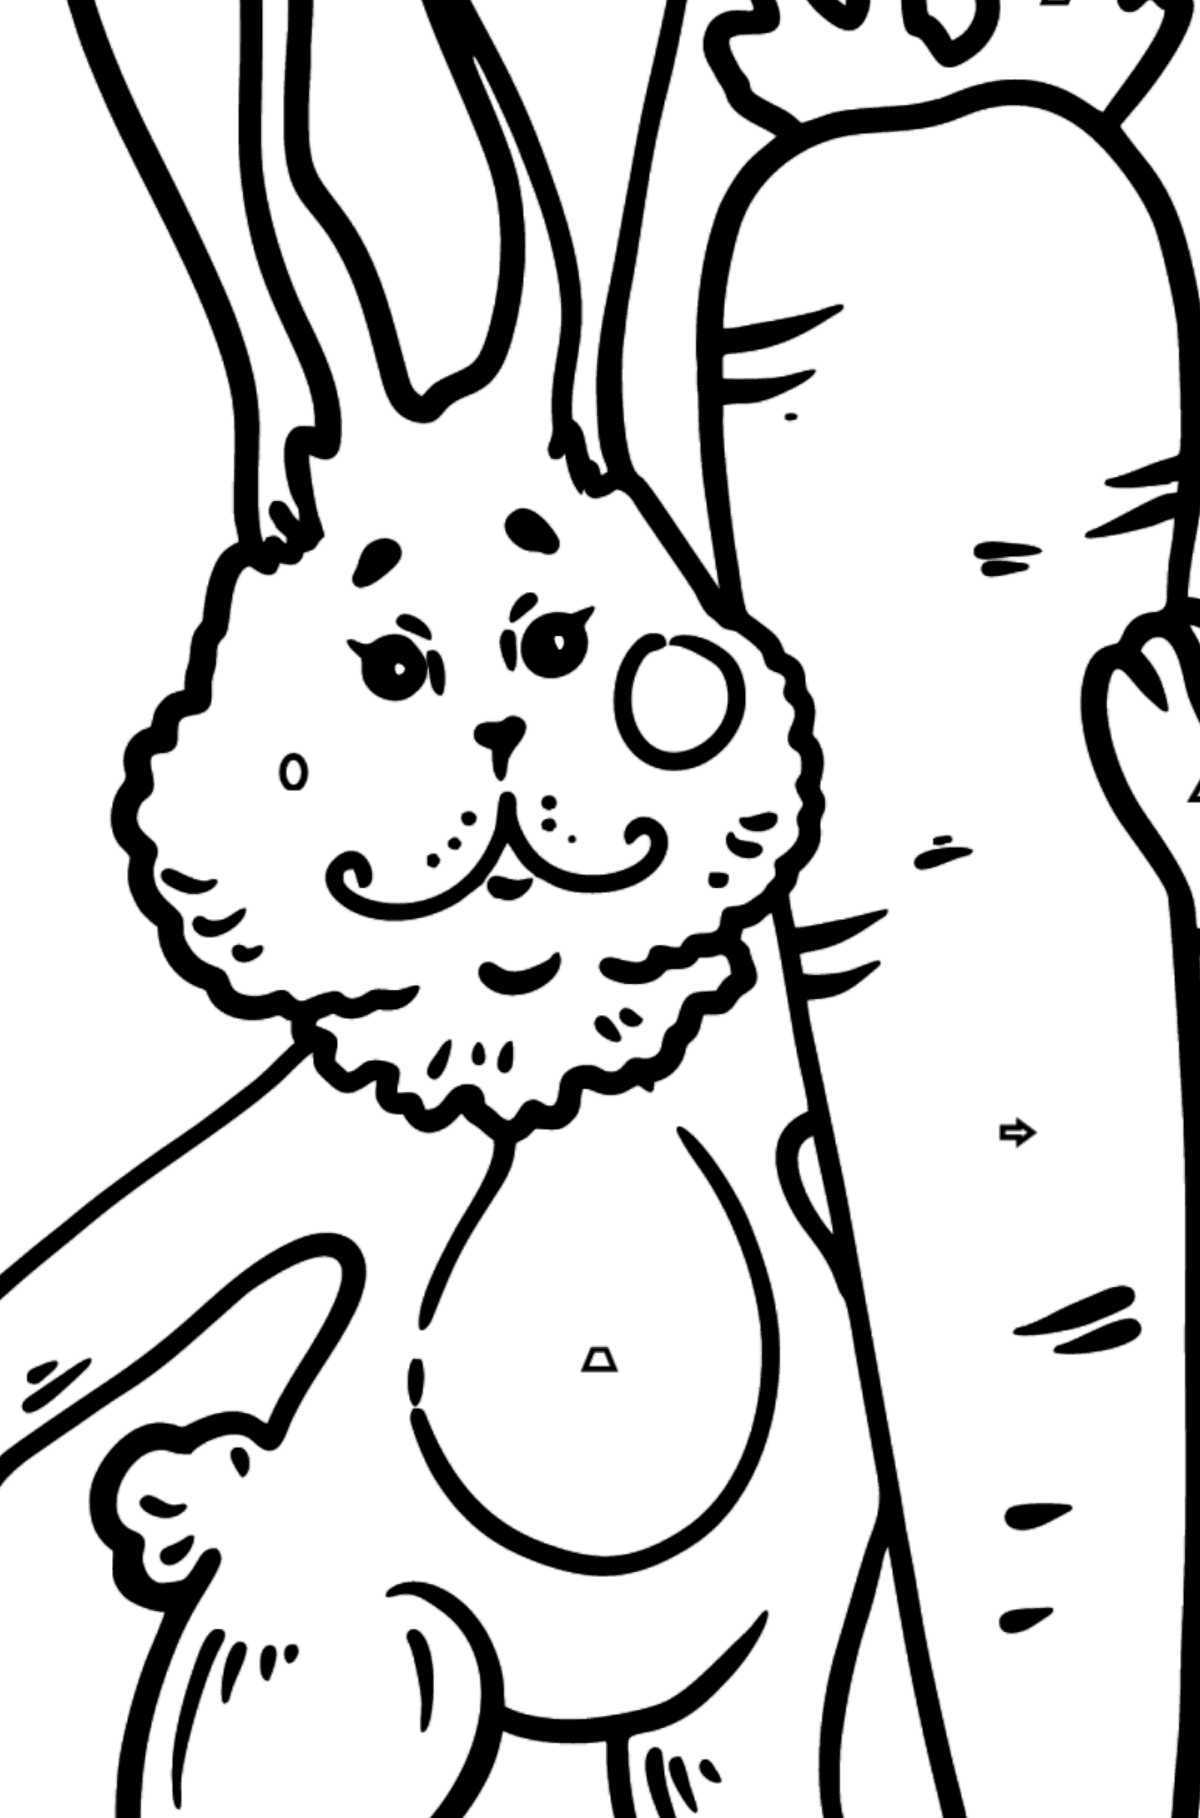 Bunny with Carrot coloring page - Coloring by Geometric Shapes for Kids